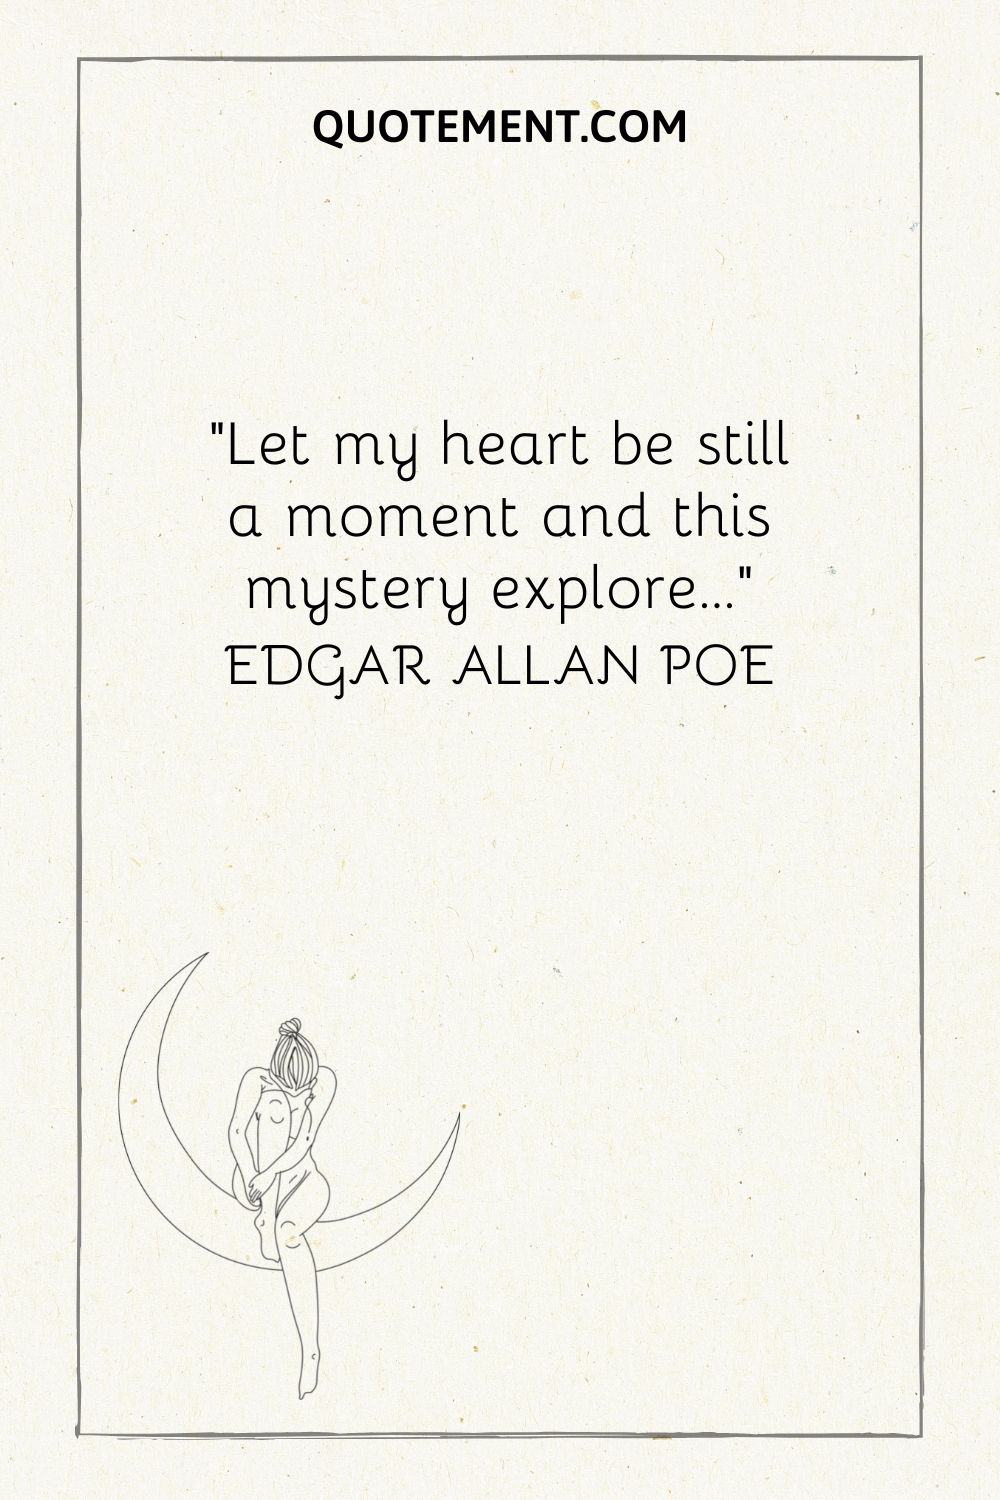 “Let my heart be still a moment and this mystery explore...” — Edgar Allan Poe